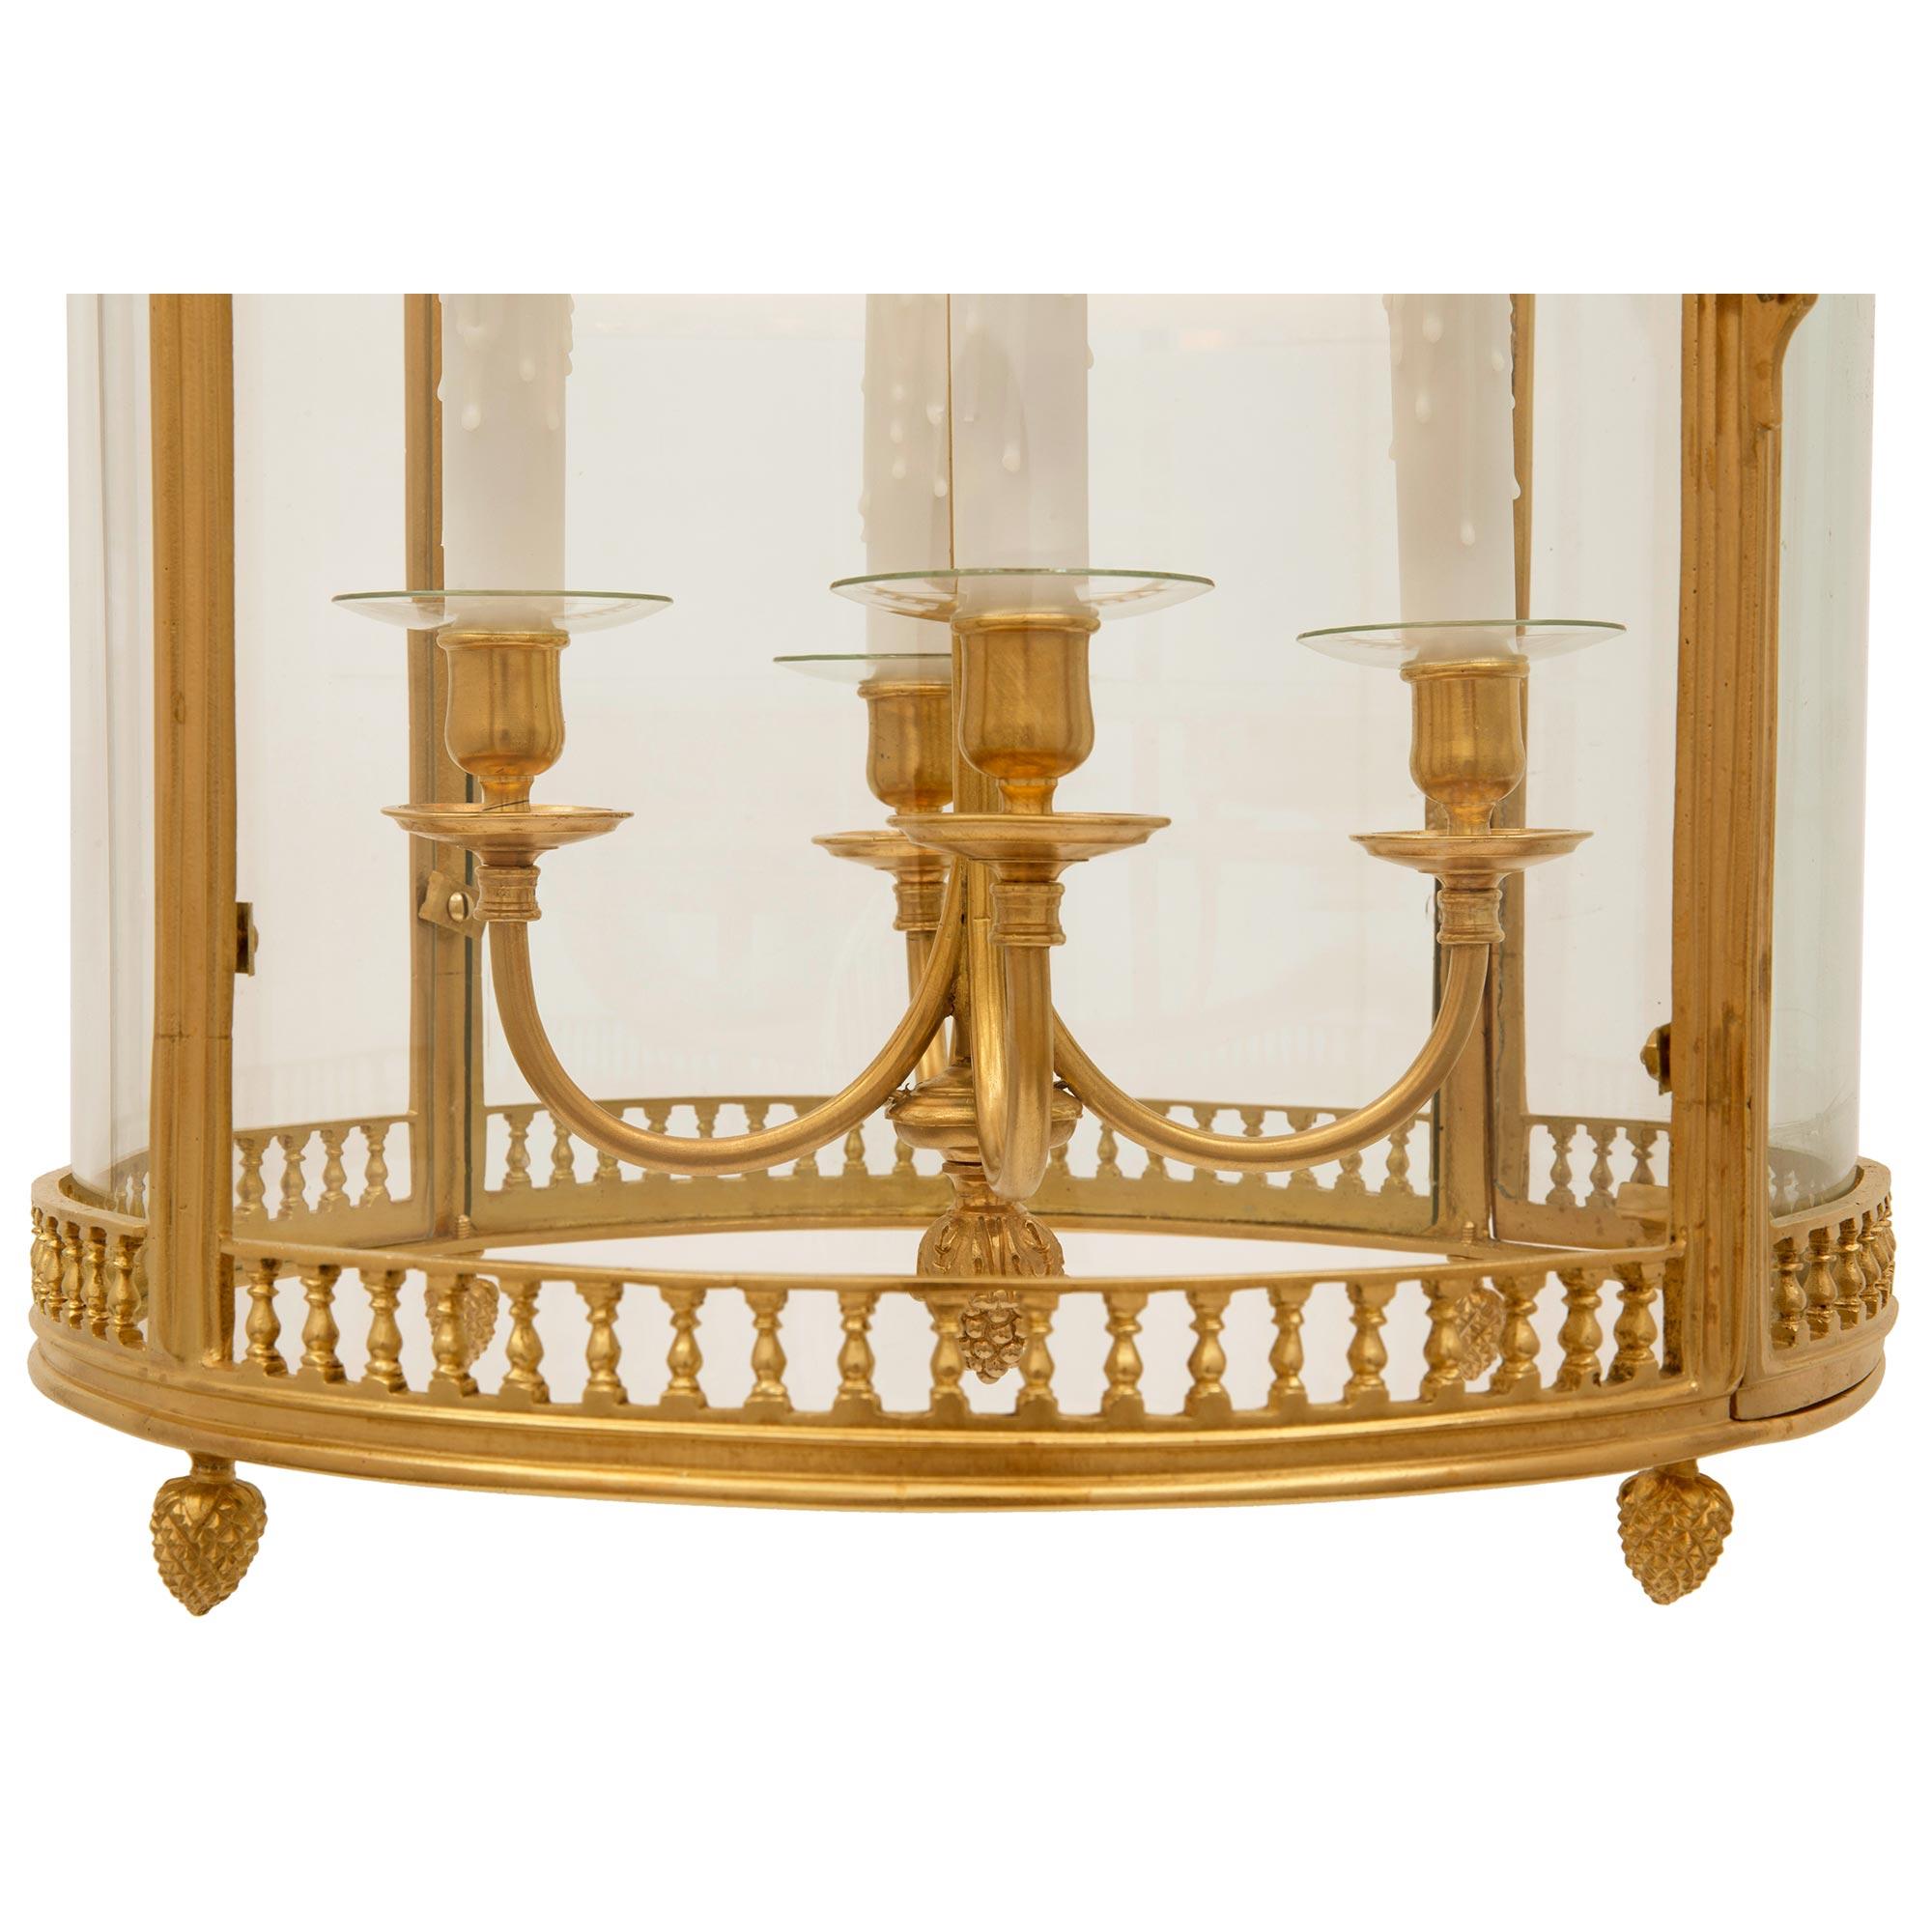 French 19th Century Louis XVI Style Ormolu and Glass Lantern For Sale 5